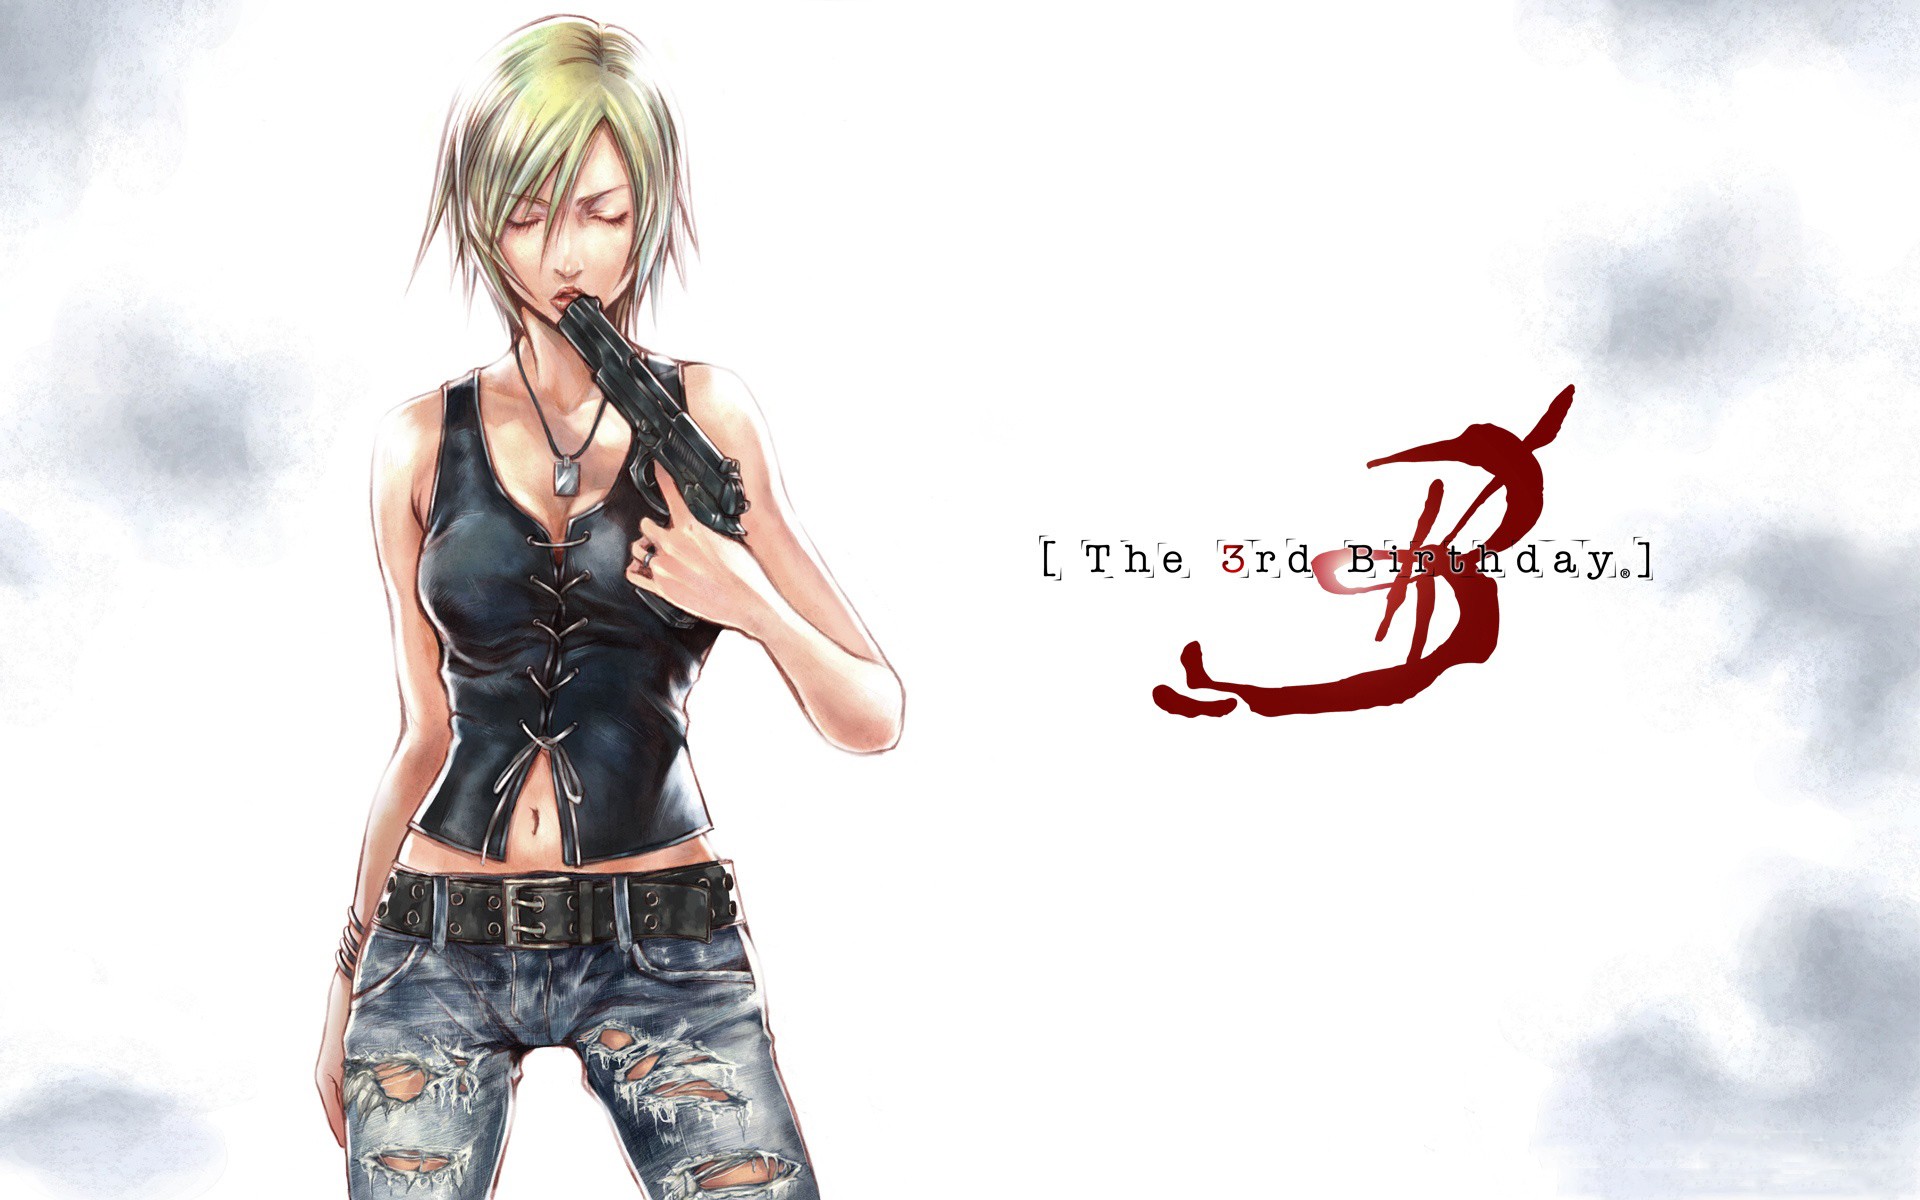 Anime 1920x1200 Parasite Eve Aya Brea The 3rd Birthday belly necklace standing video games video game art girls with guns blonde video game girls anime girls with guns